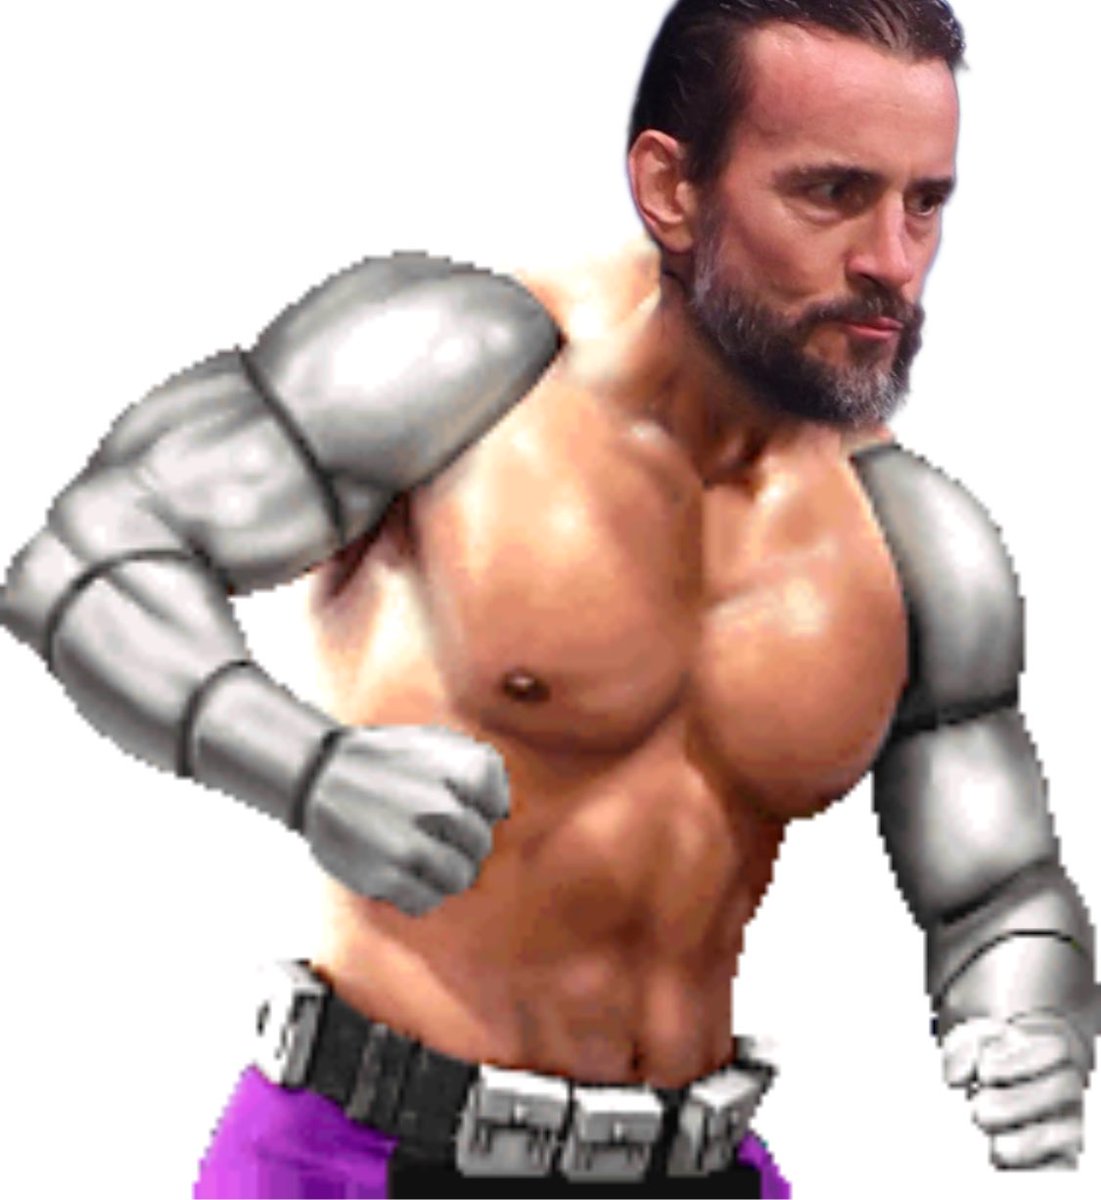 the only way we get this CM Punk match